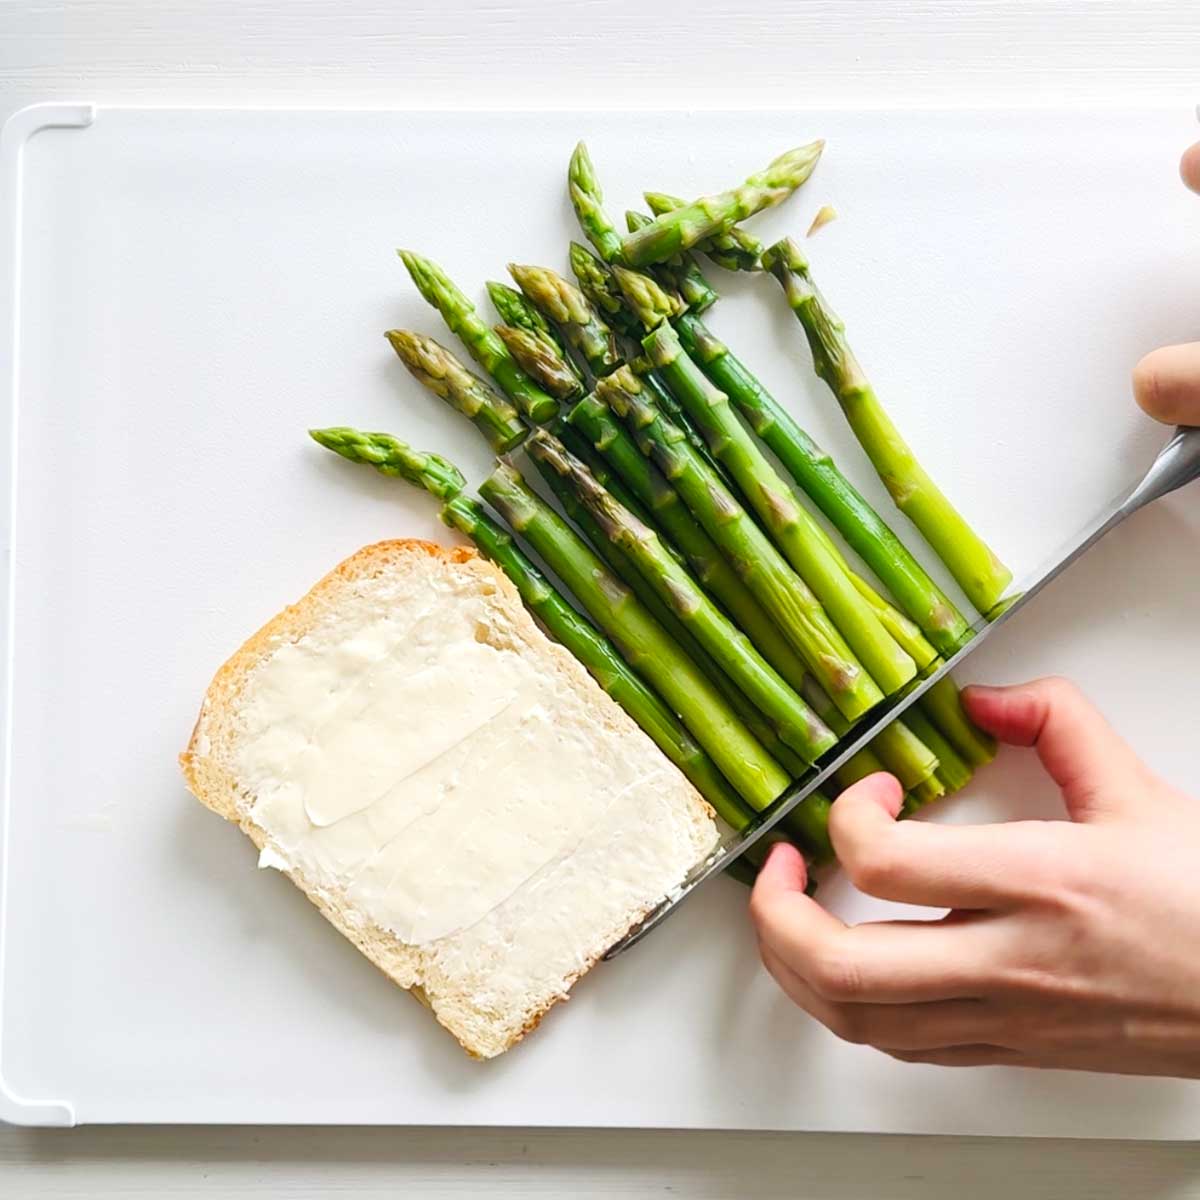 How to Make Asparagus Finger Sandwiches (just 3-Ingredients!) - Sweet Corn Flatbread